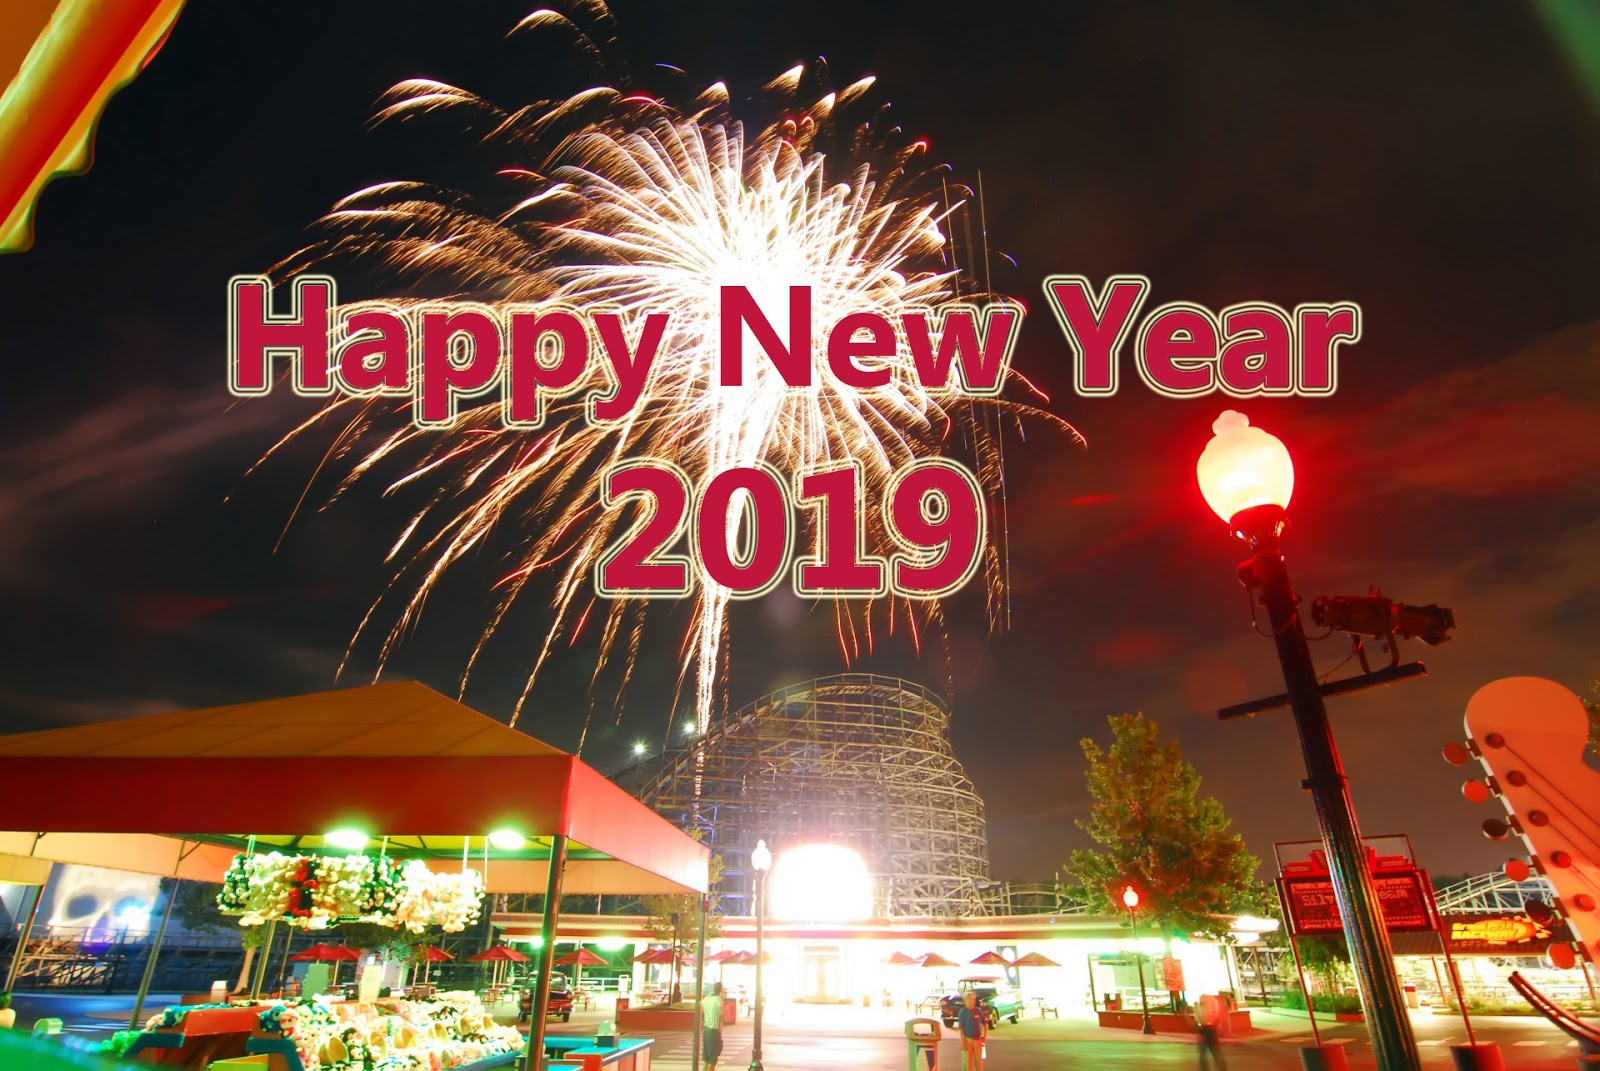 Happy New Year 2019 Wallpaper - Happy New Year 2019 , HD Wallpaper & Backgrounds